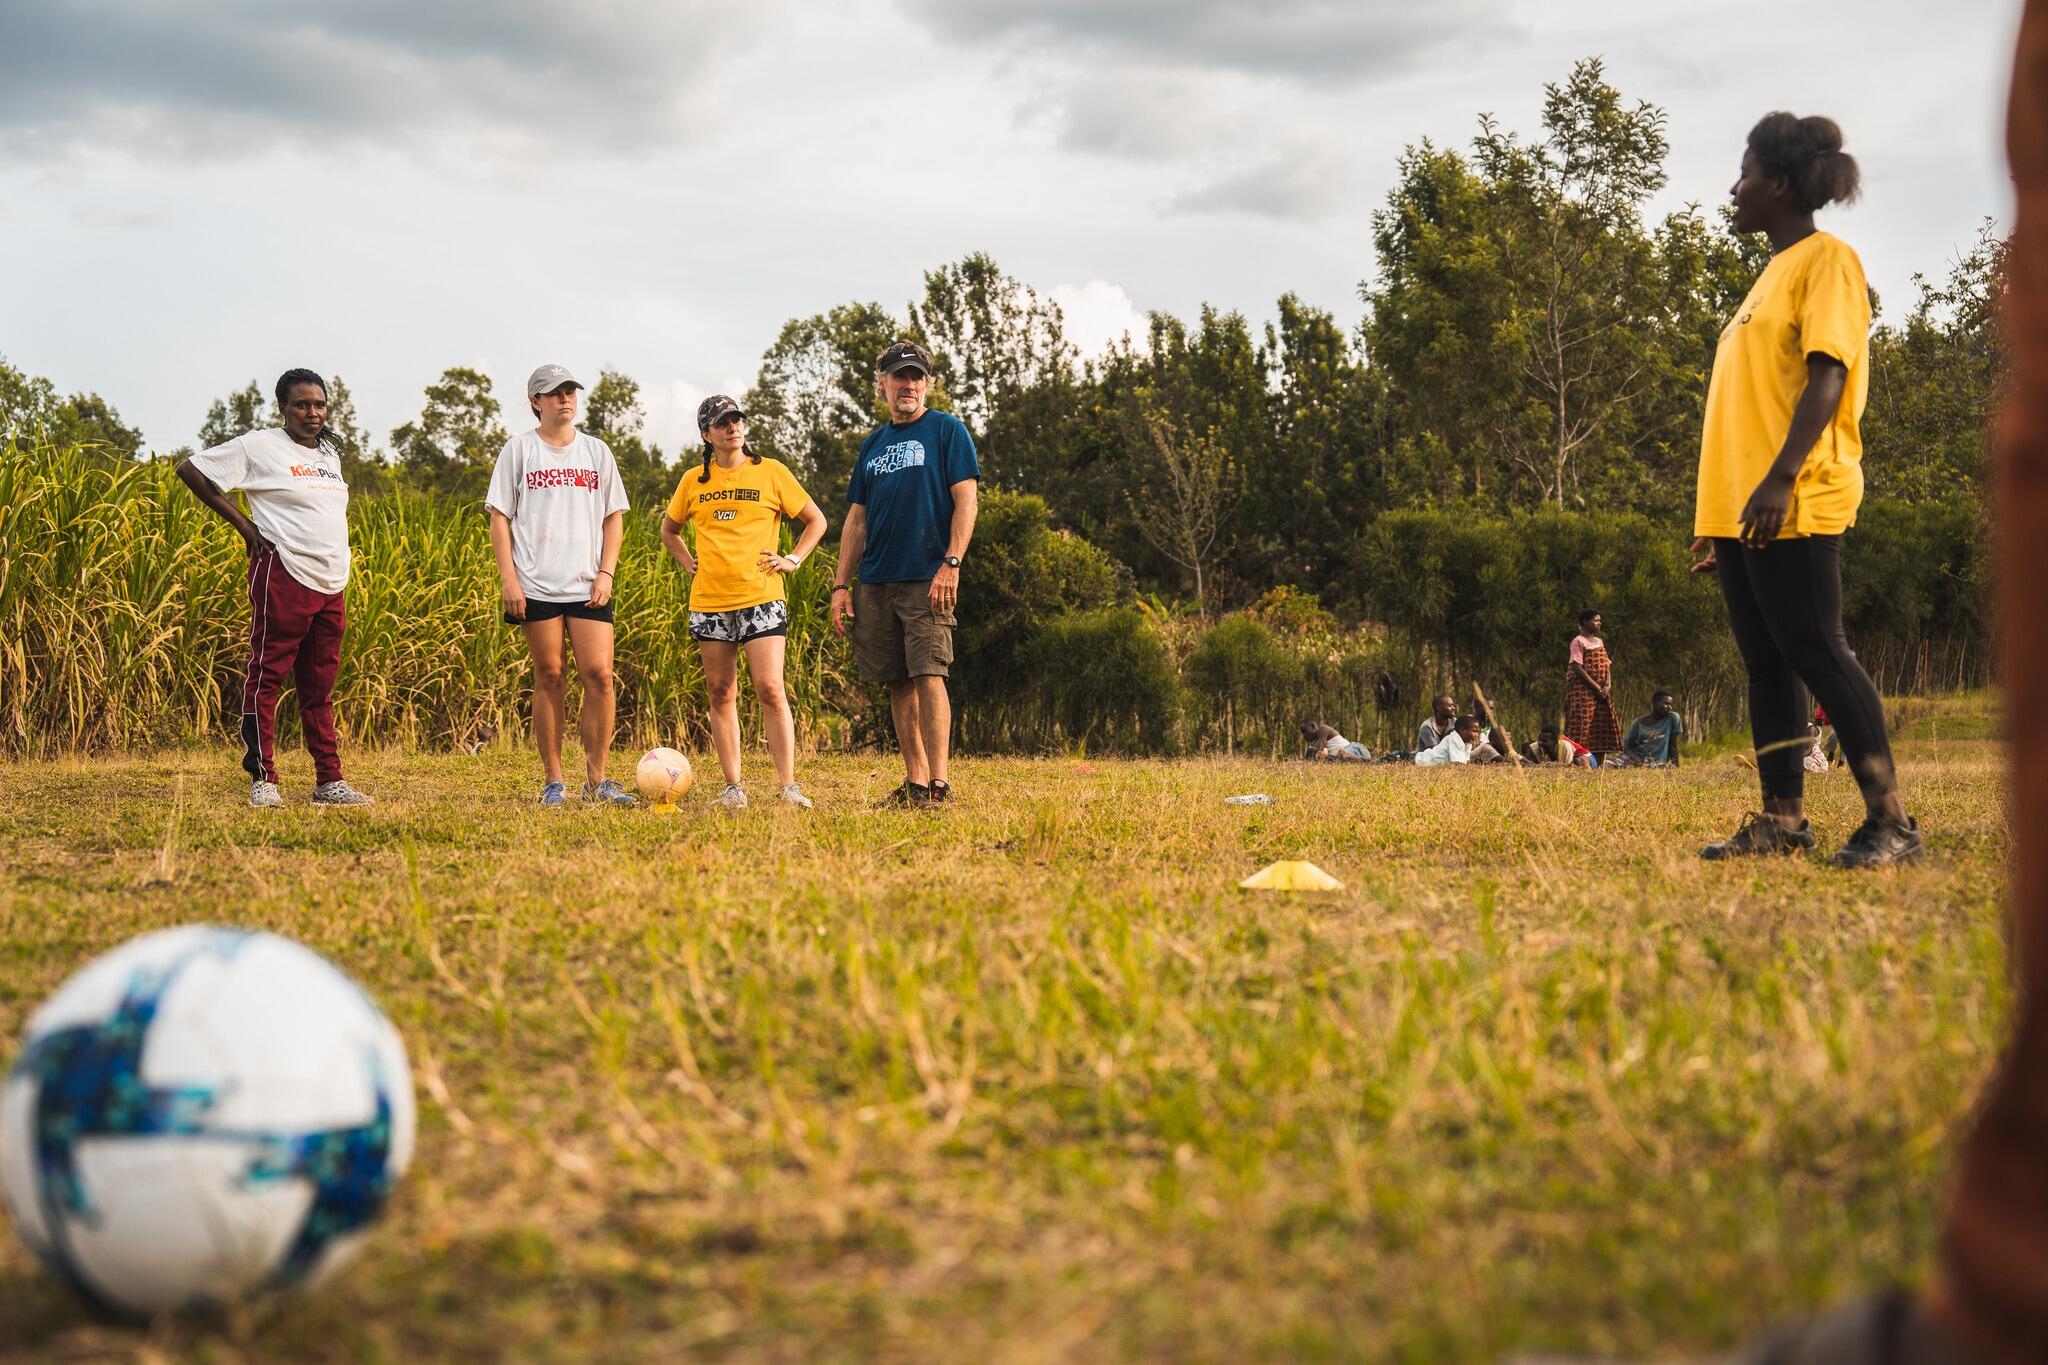 Center for Sport Leadership faculty and students stand in a soccer field along with local residents. A soccer ball is in the foreground.